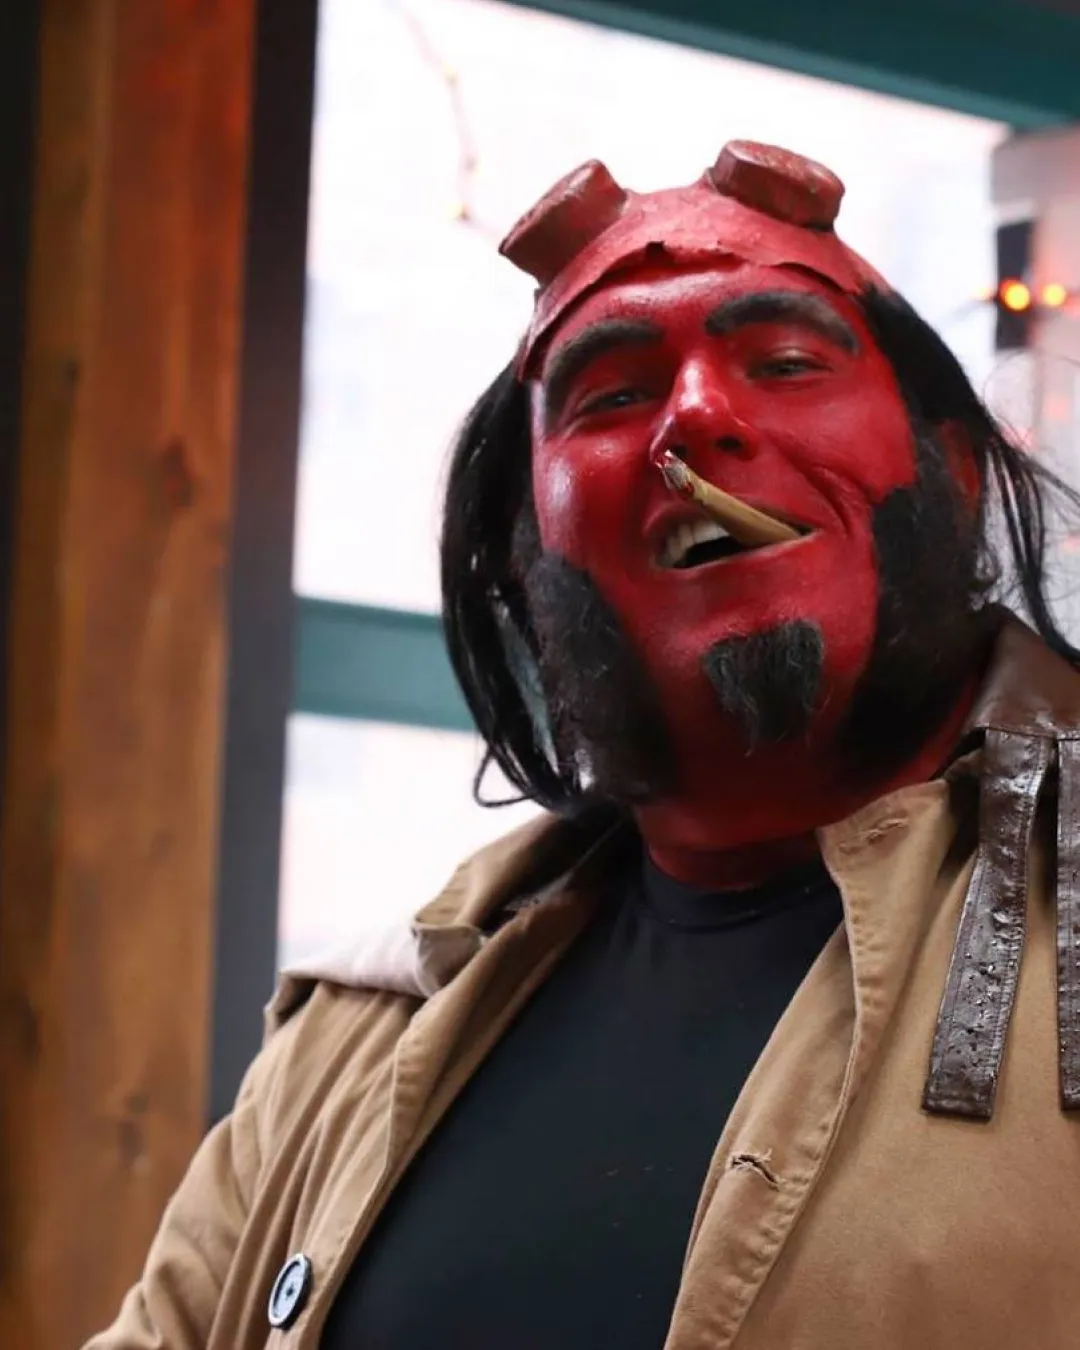 Amidst the energy, a Halloween Hellboy costume captures the essence of the night, mesmerizing onlookers with his happy smile during the Halloween bar crawl

